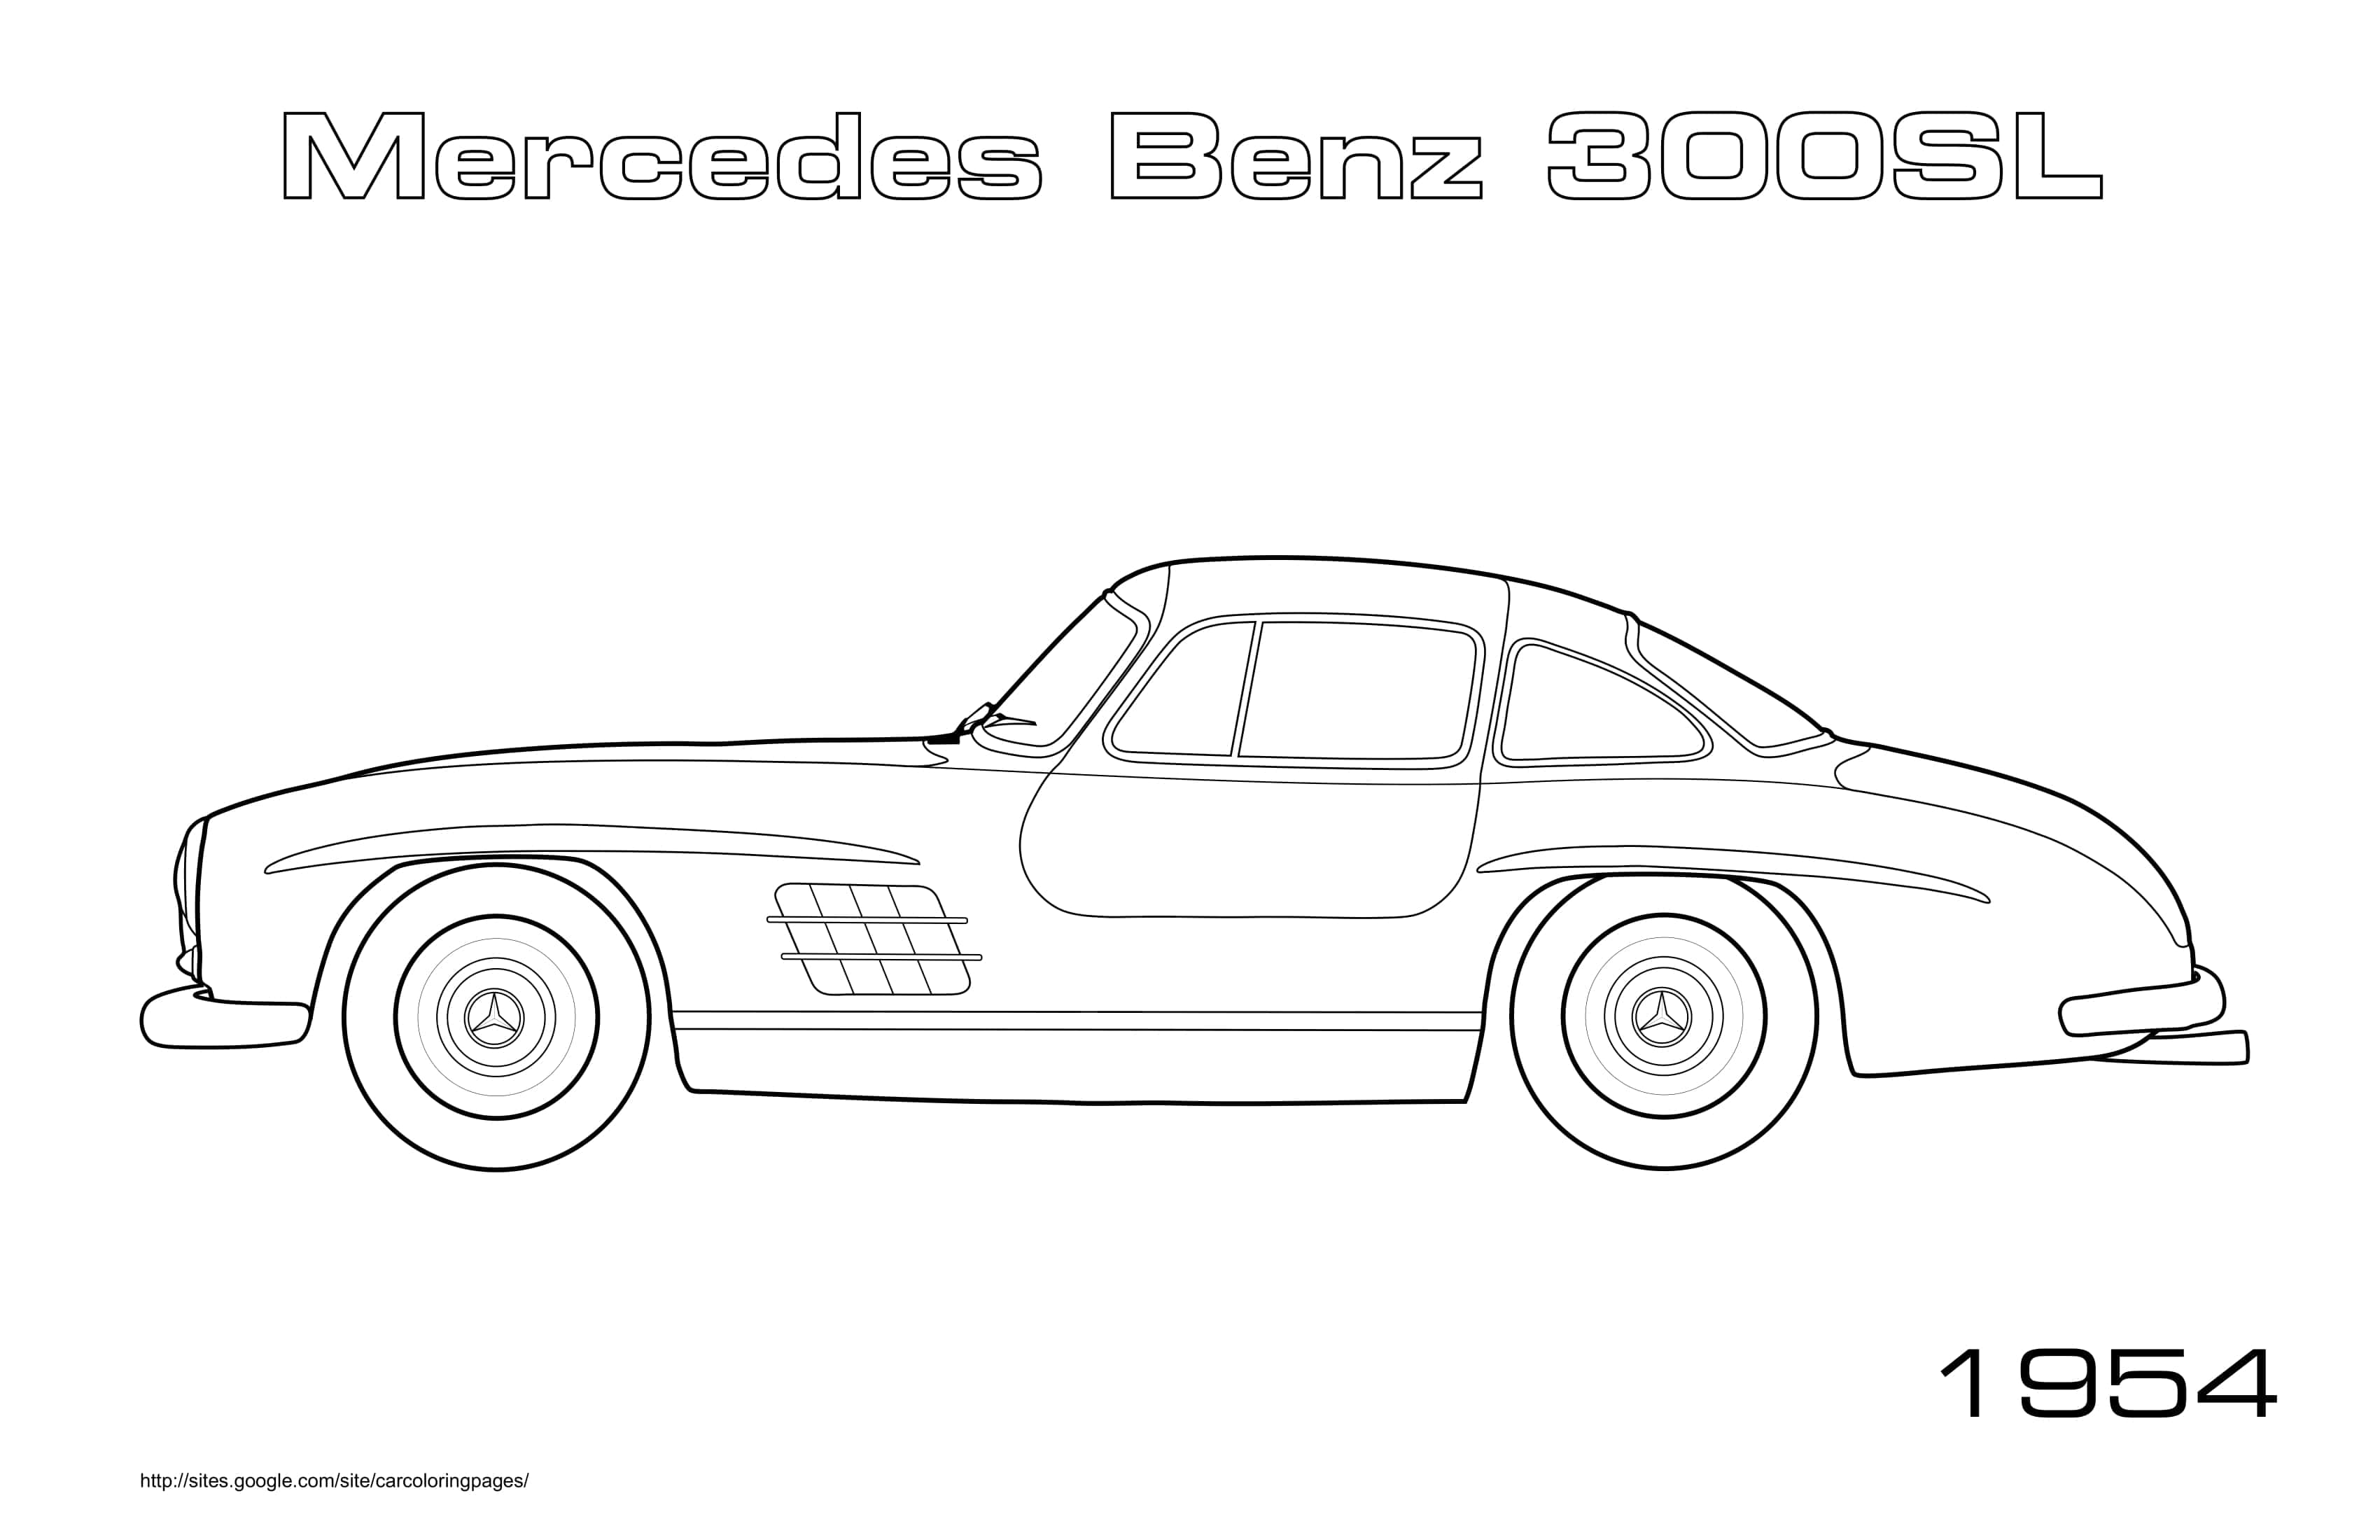 Old Car Mercedes Benz 300sl 1954 Coloring Page